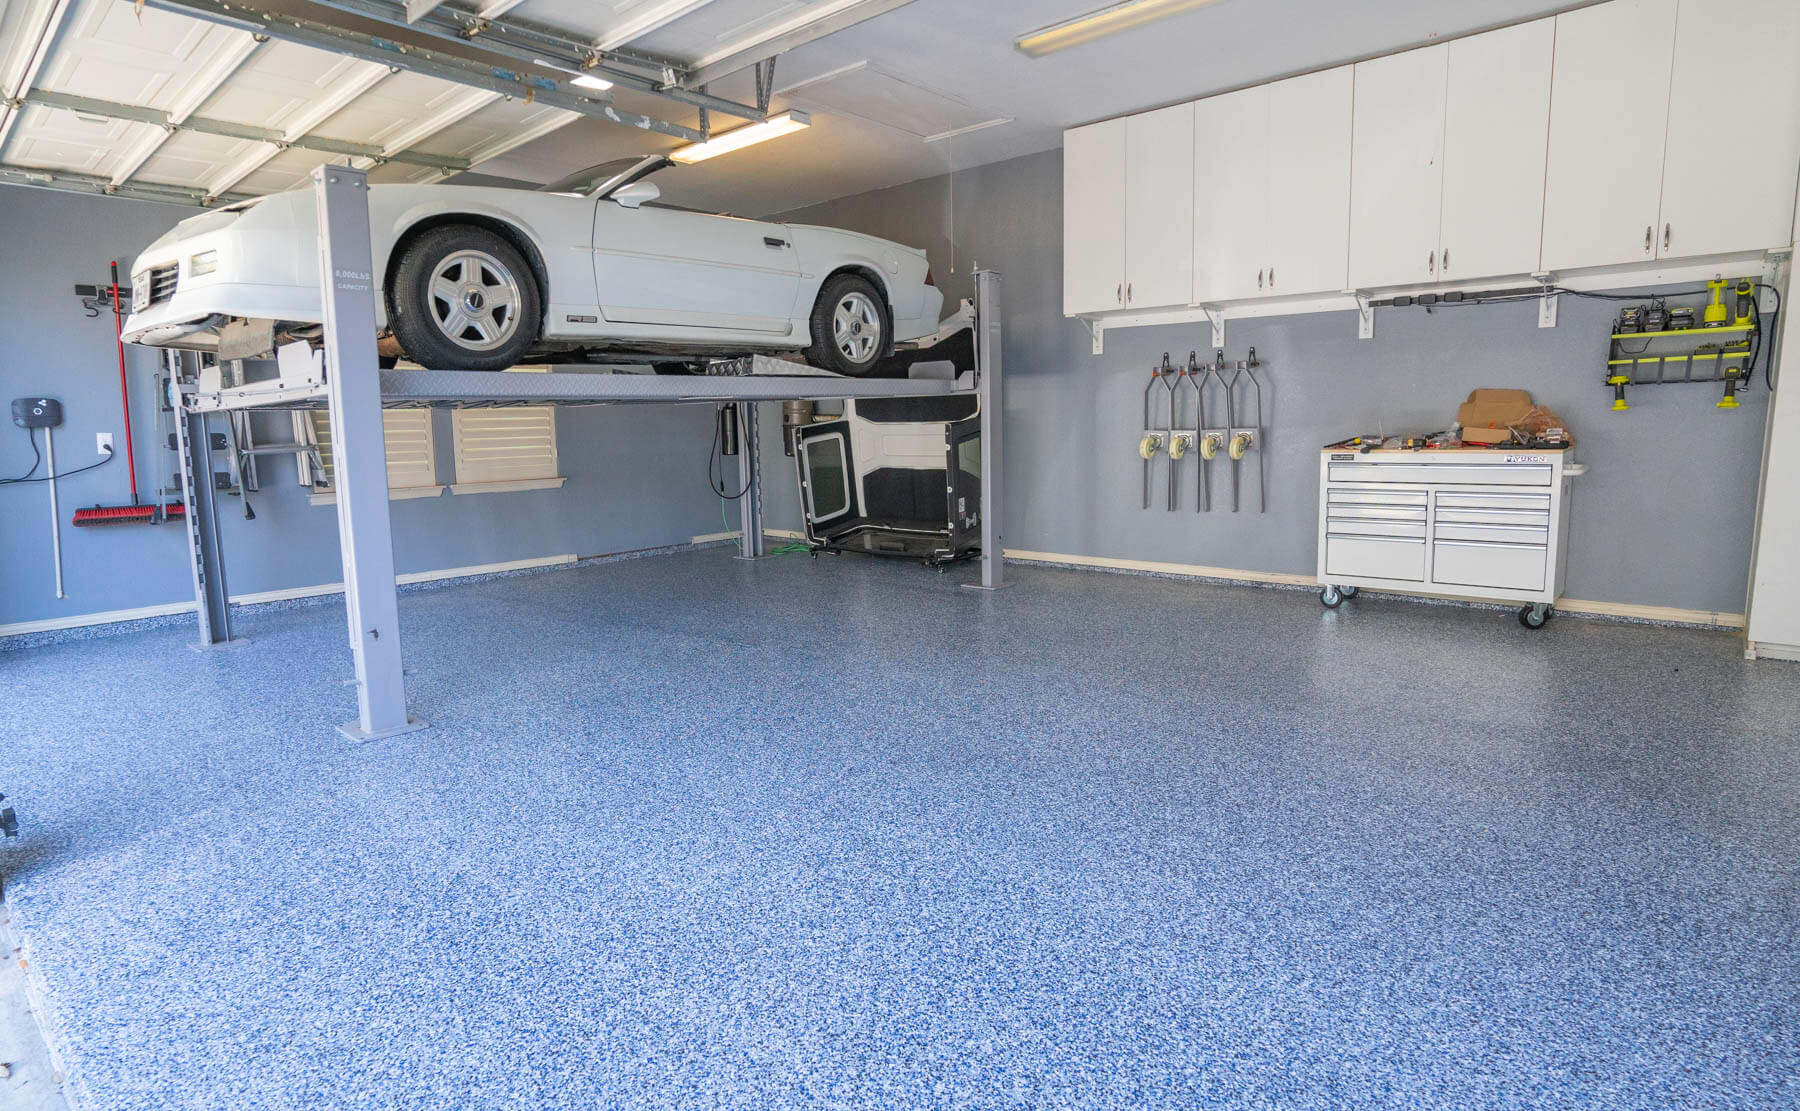 Garage Auto Shop with Polyaspartic Coating - Garage Lift  Photo - Garage Lift  Photo